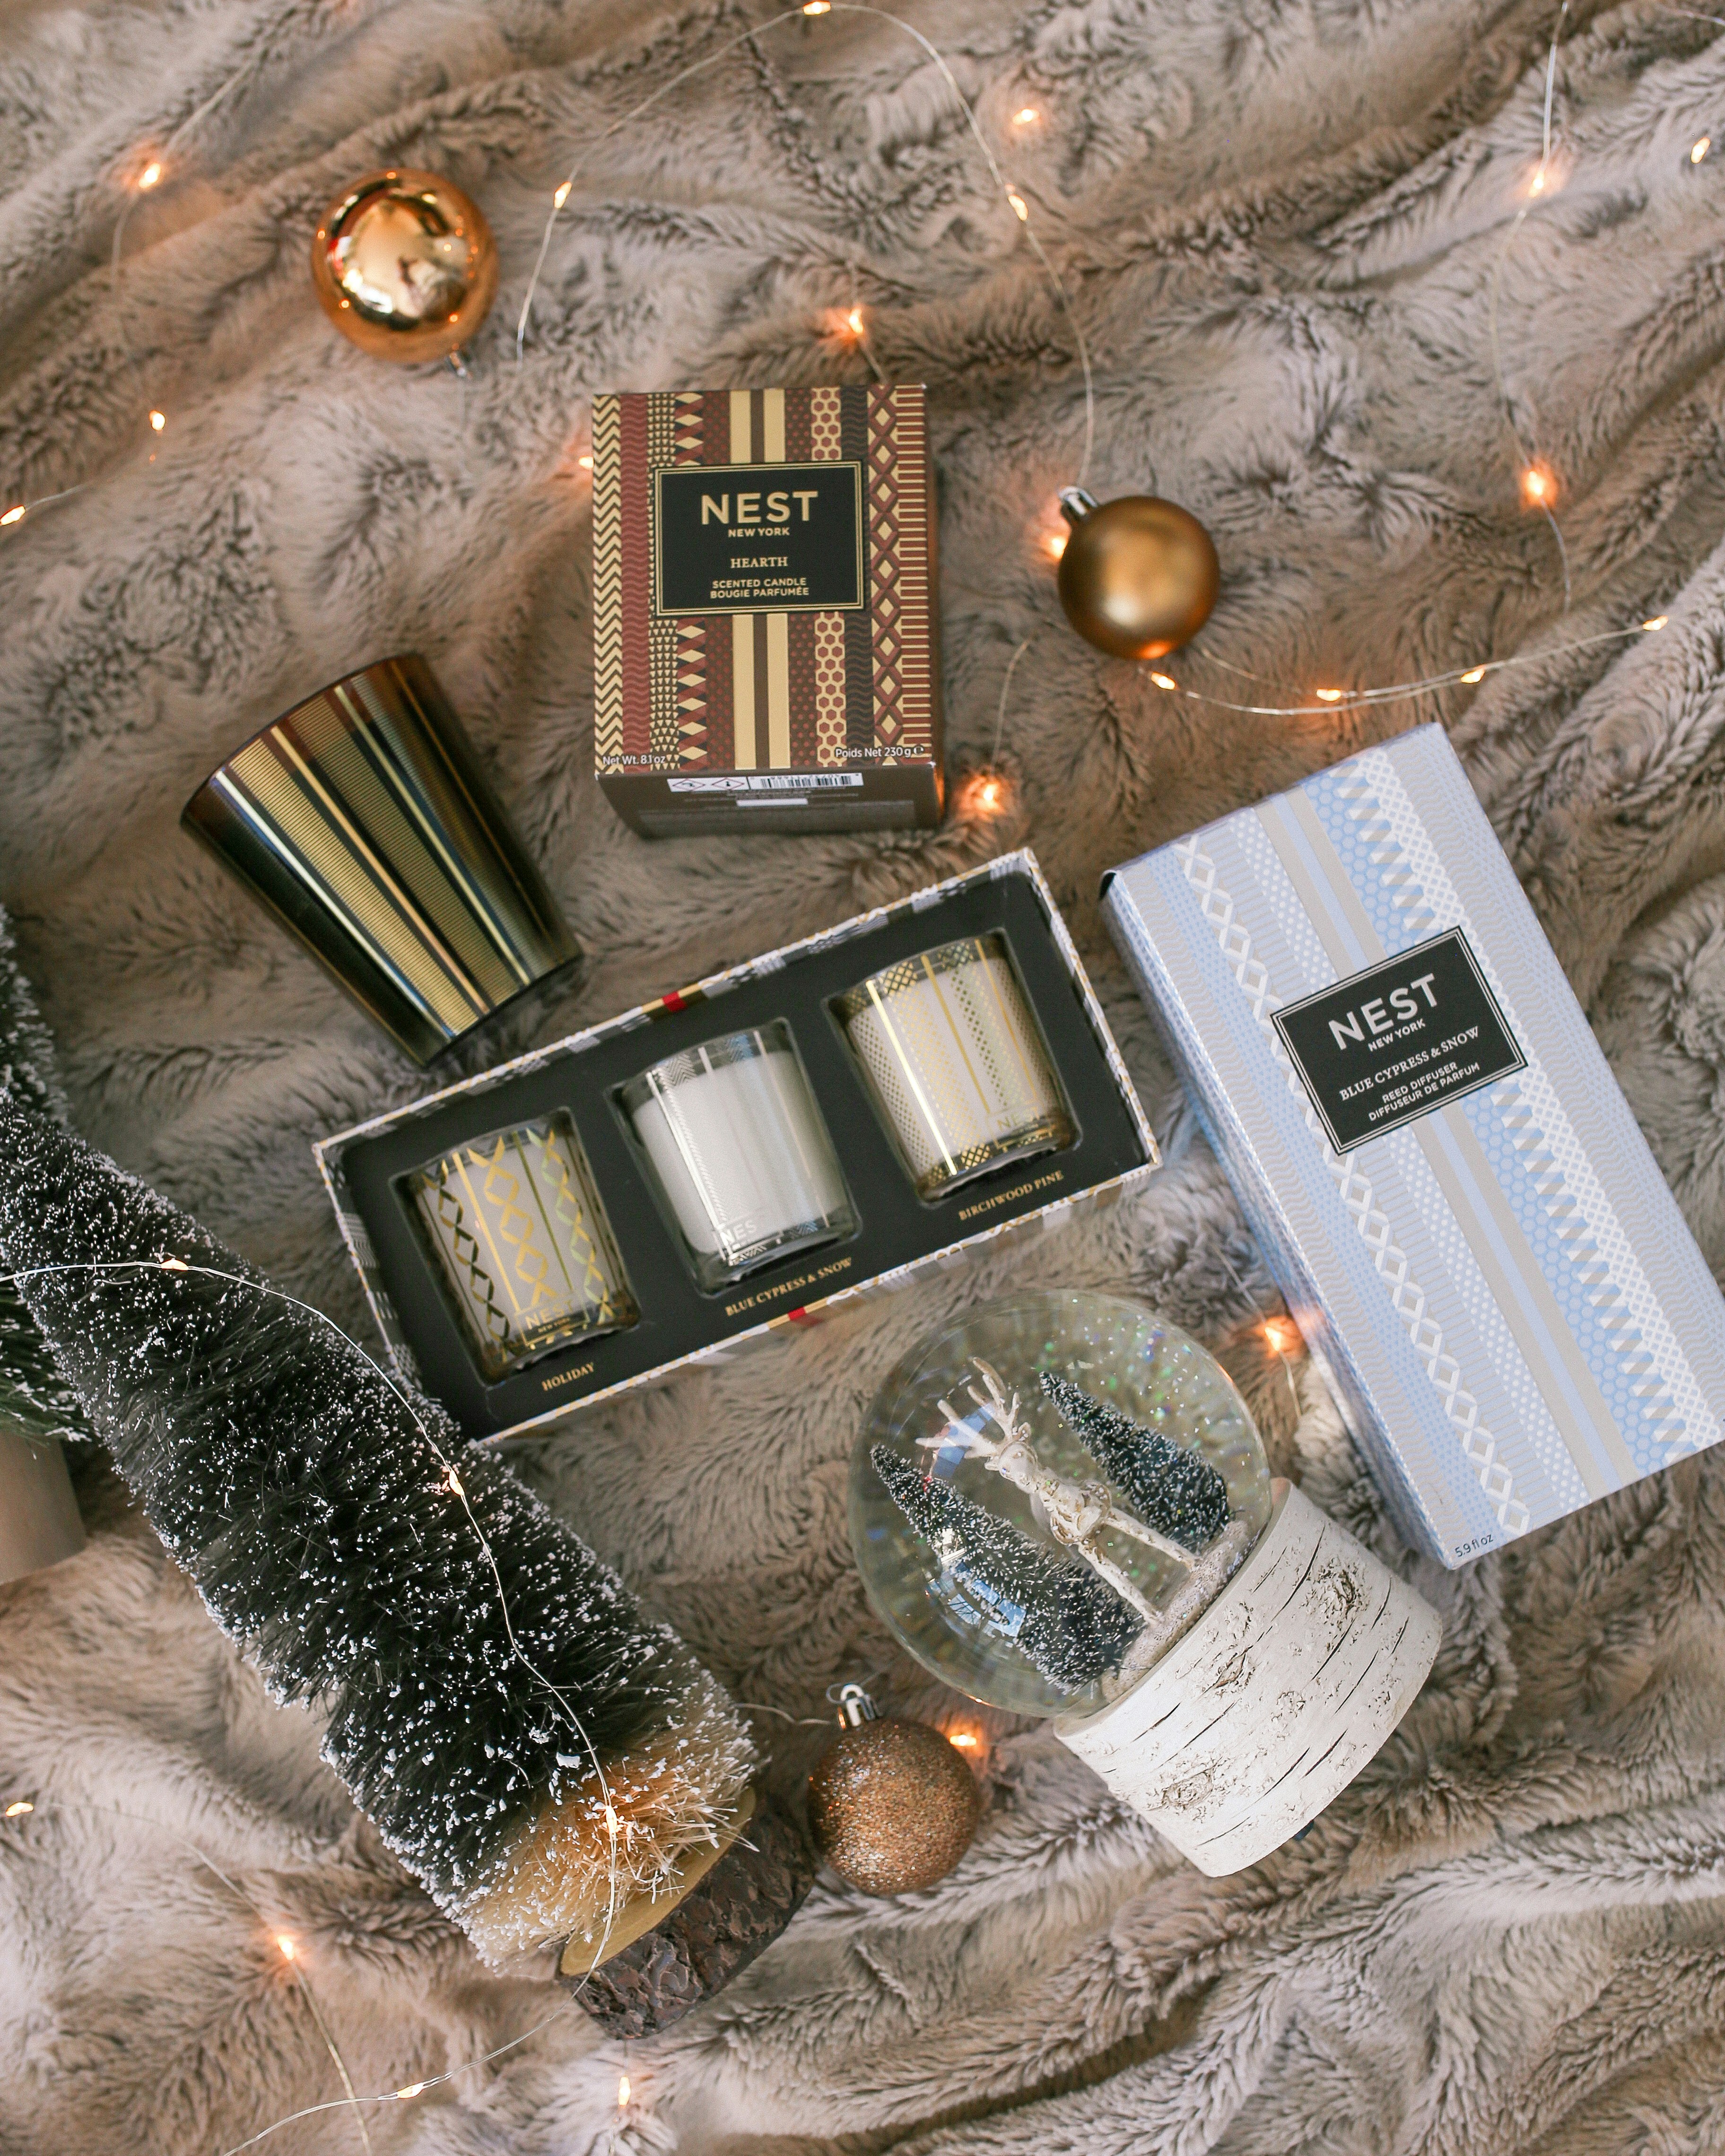 Nest Fragrances Holiday Gift Sets and Scents 